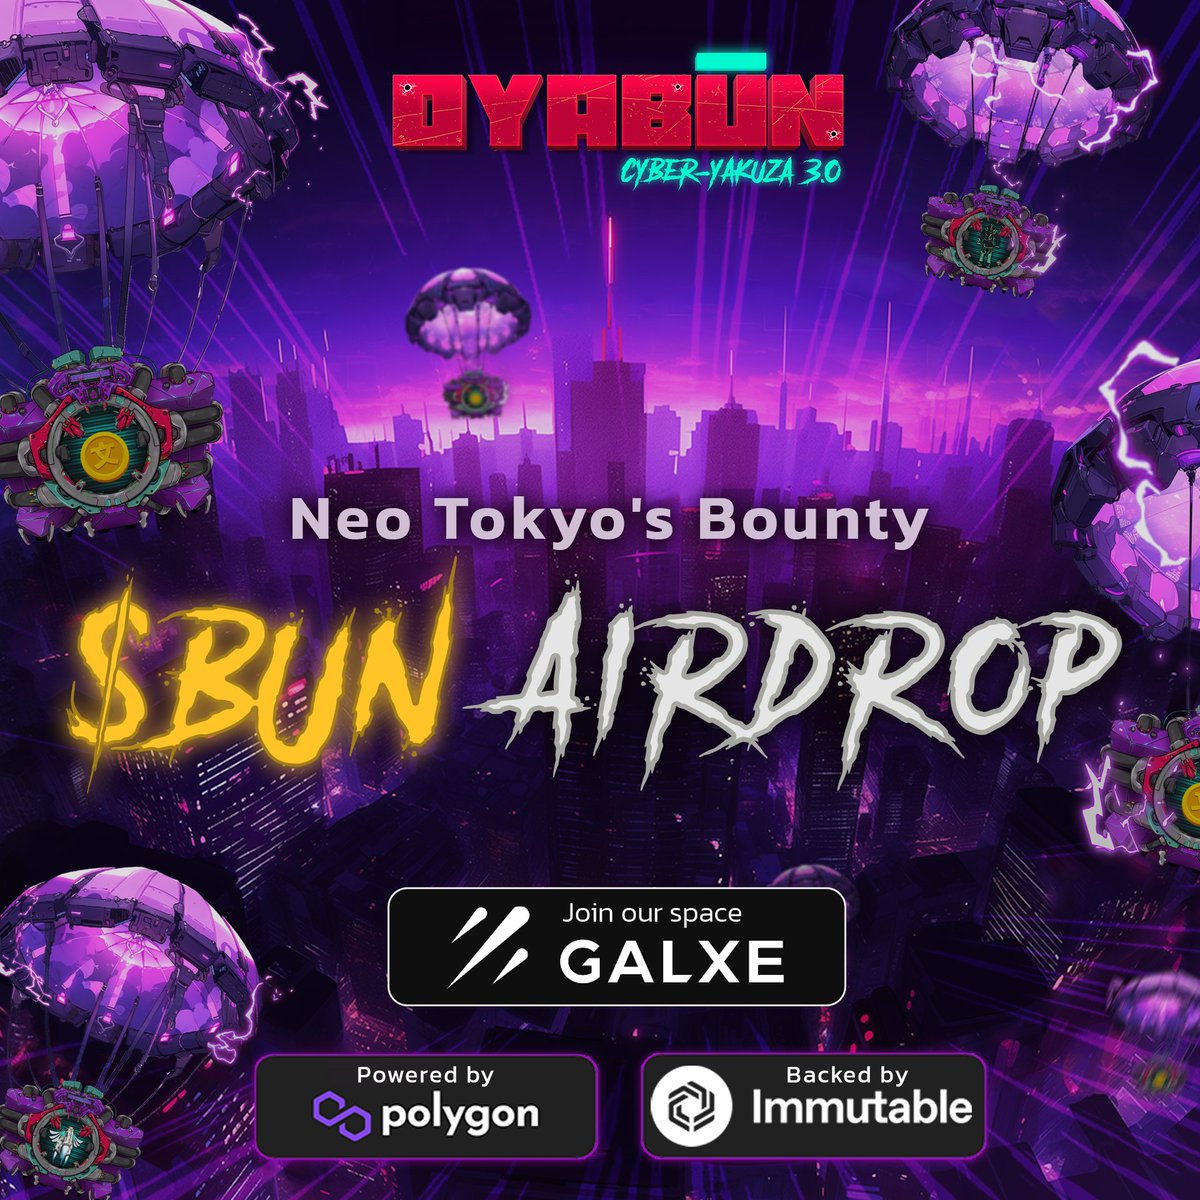 🌆 Neo Tokyo's Bounty 🚀 $BUN AIRDROP [thread 1/6] It's starting now! Complete Social or Gaming Missions to earn $BUN and become Neo Tokyo's wealthiest cyber-yakuza! The more missions you complete, the greater your rewards!